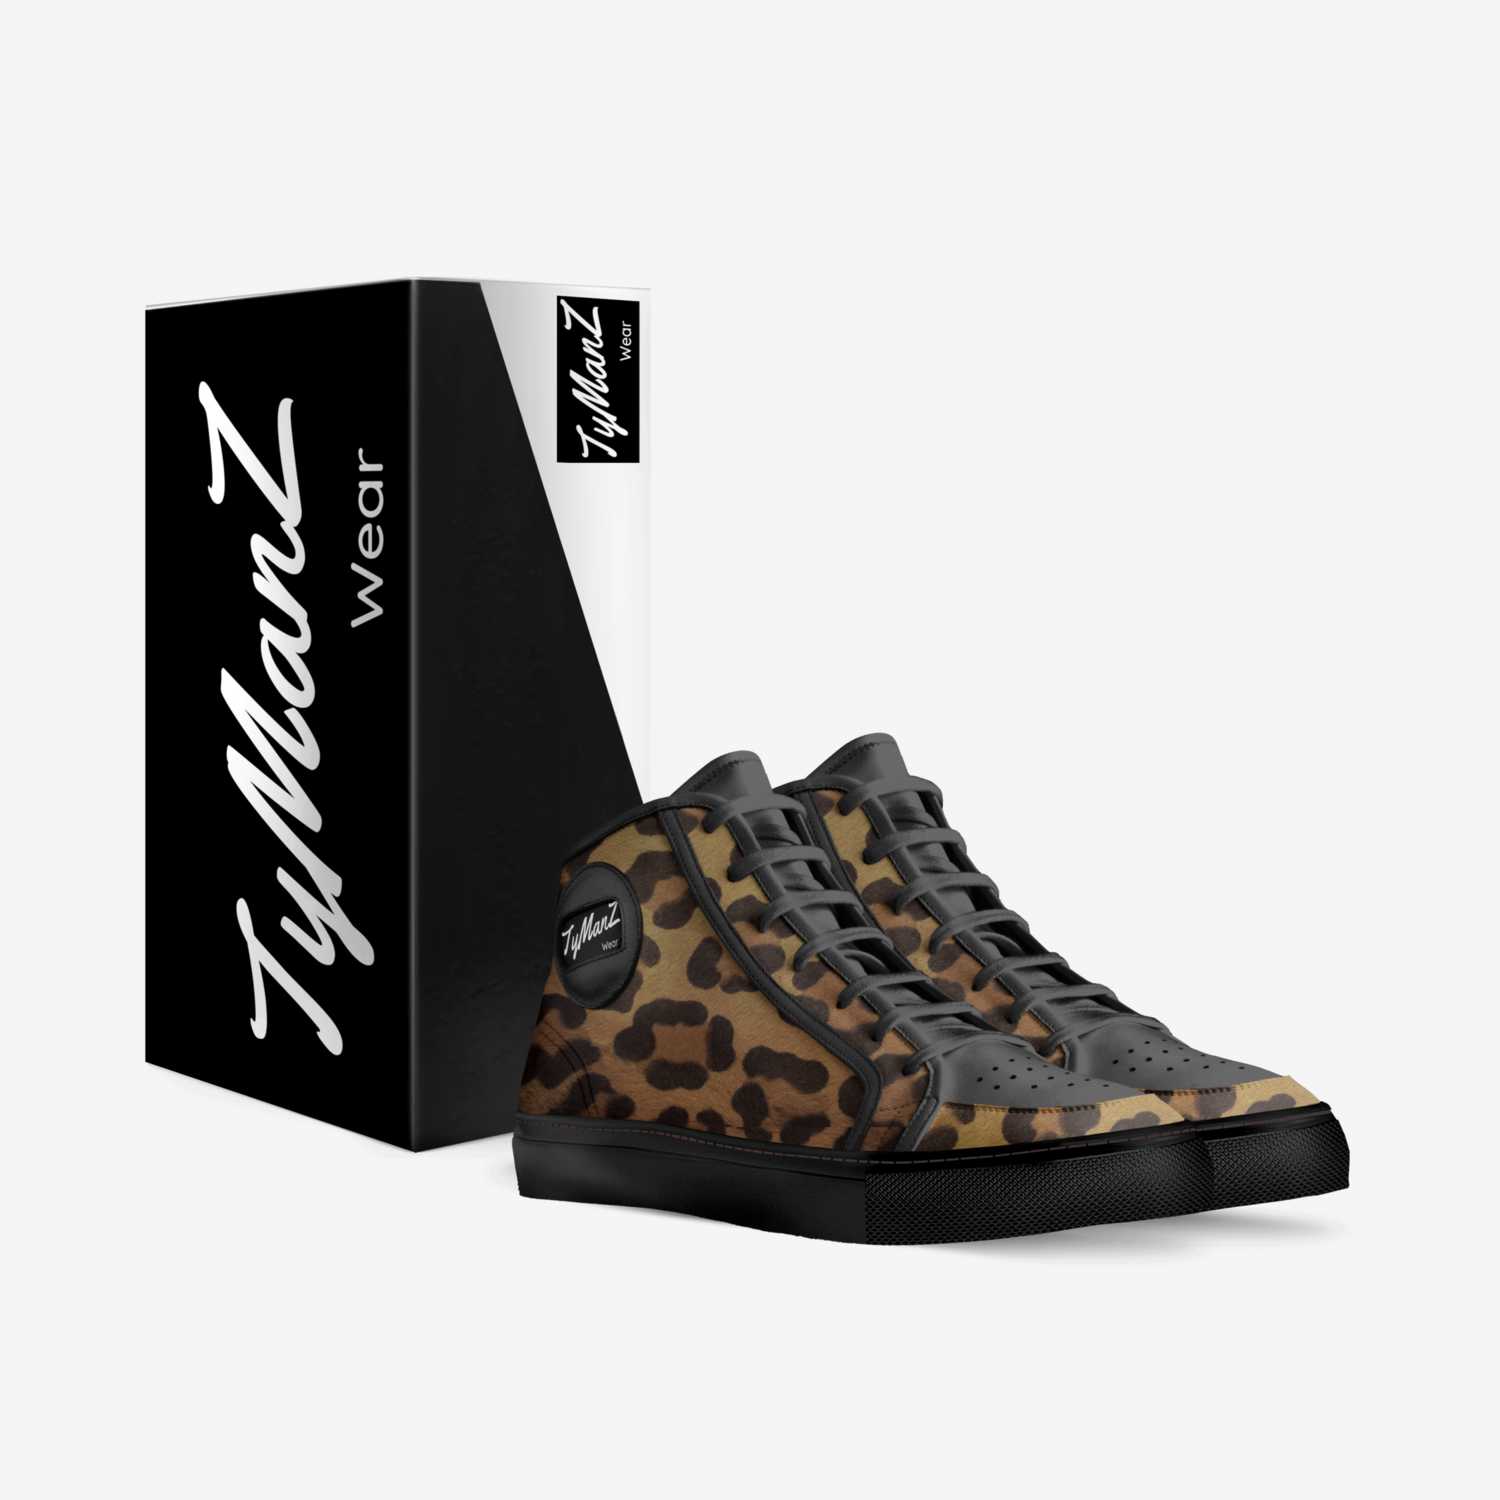 TyManZ custom made in Italy shoes by Ty Allen | Box view